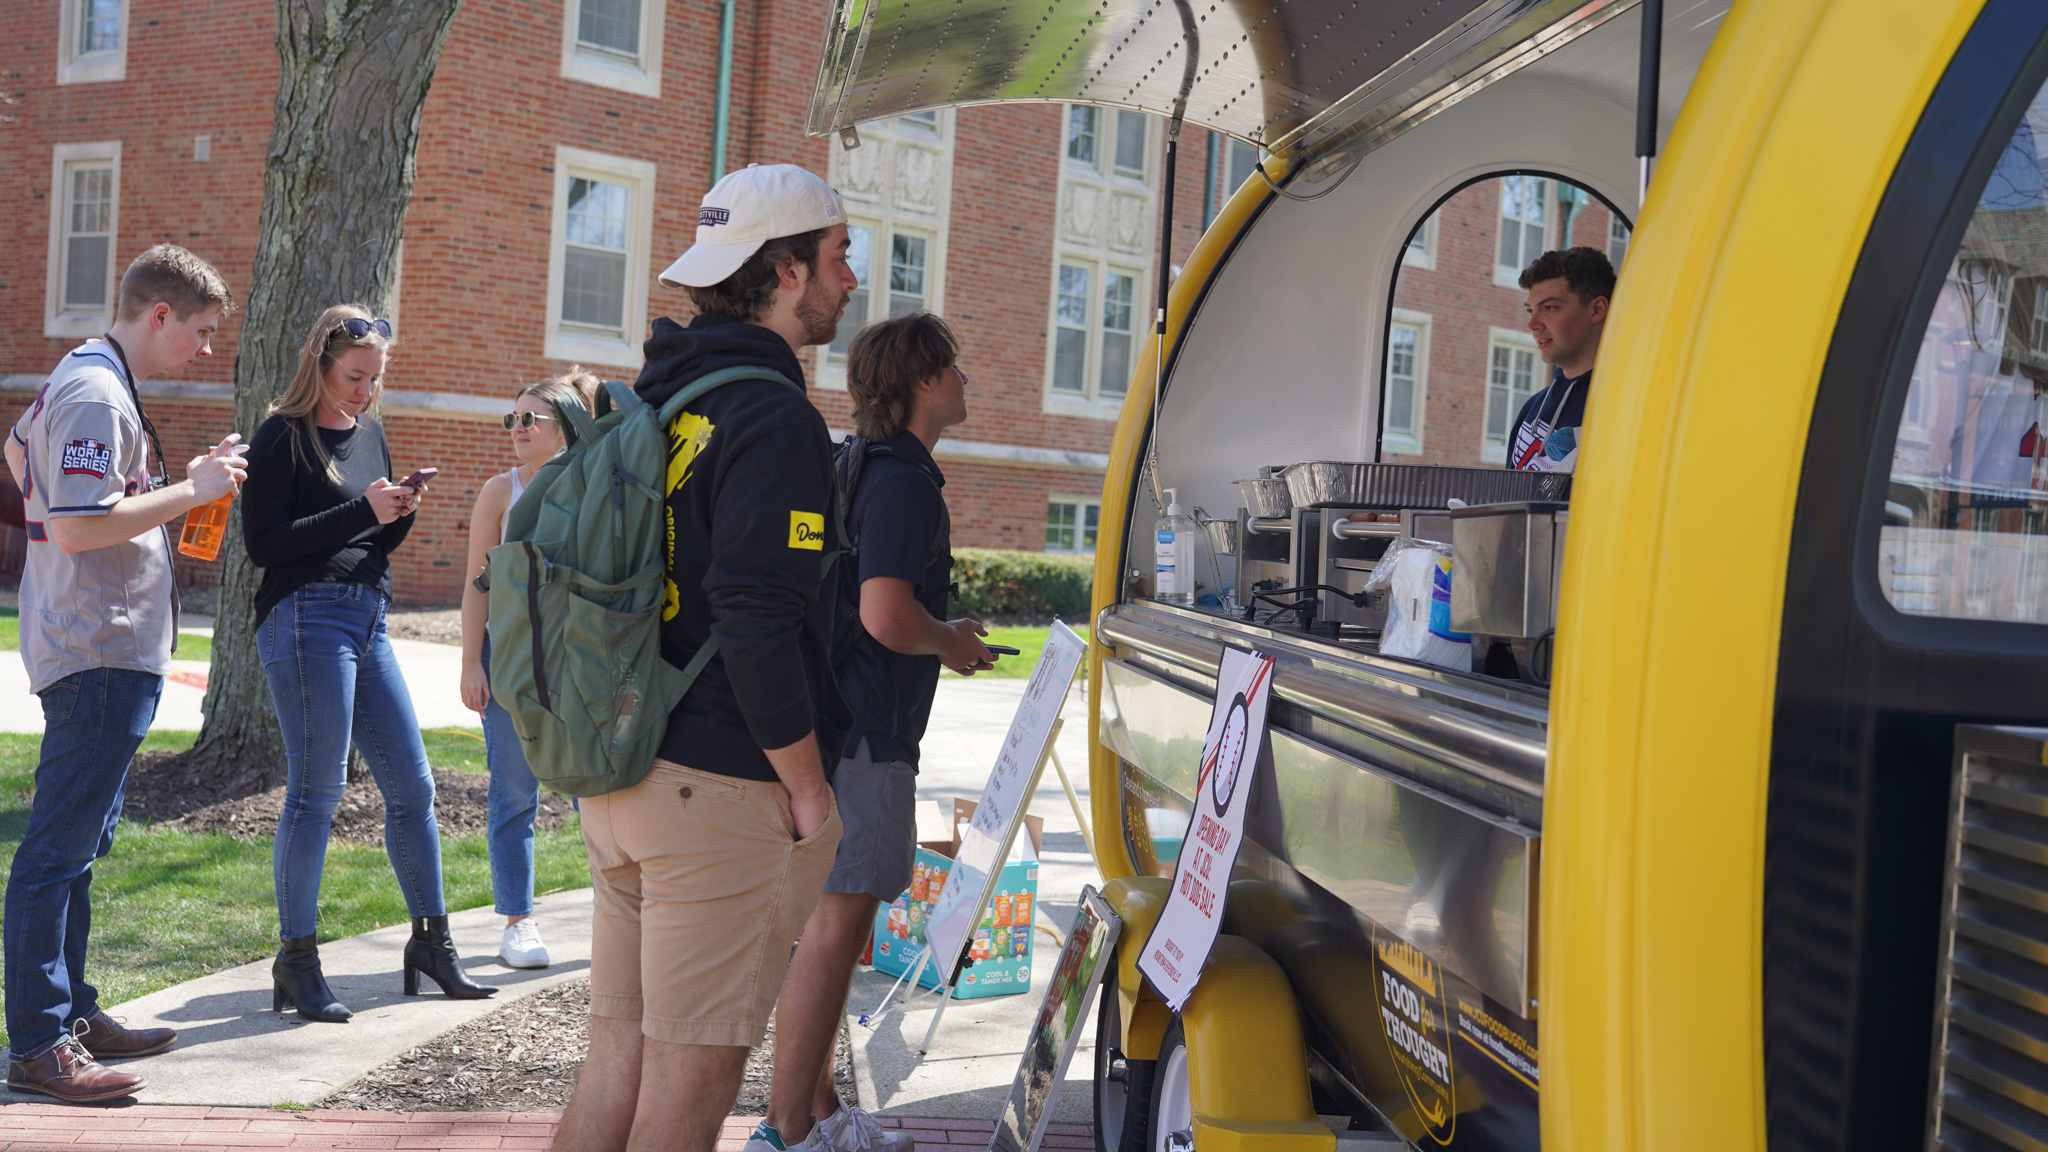 Multiple students waiting in line to order food from a small yellow and blue cart.